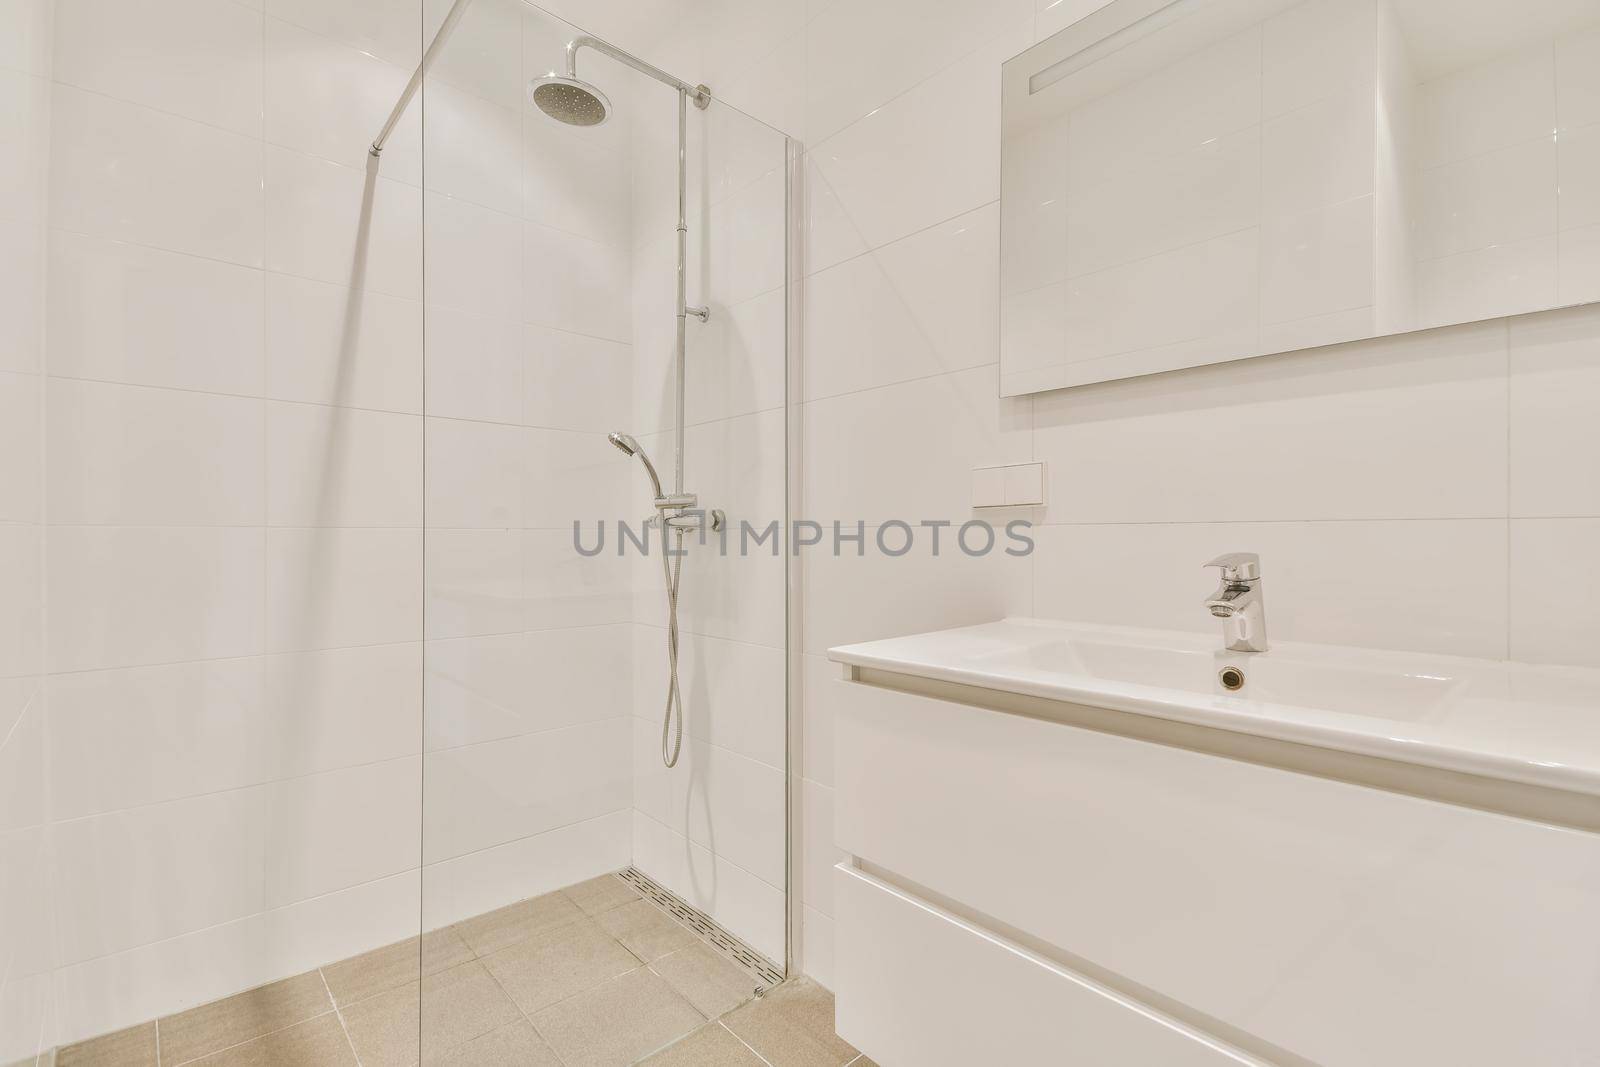 Bathroom interior with hanging chest of drawers and shower cubicle by casamedia